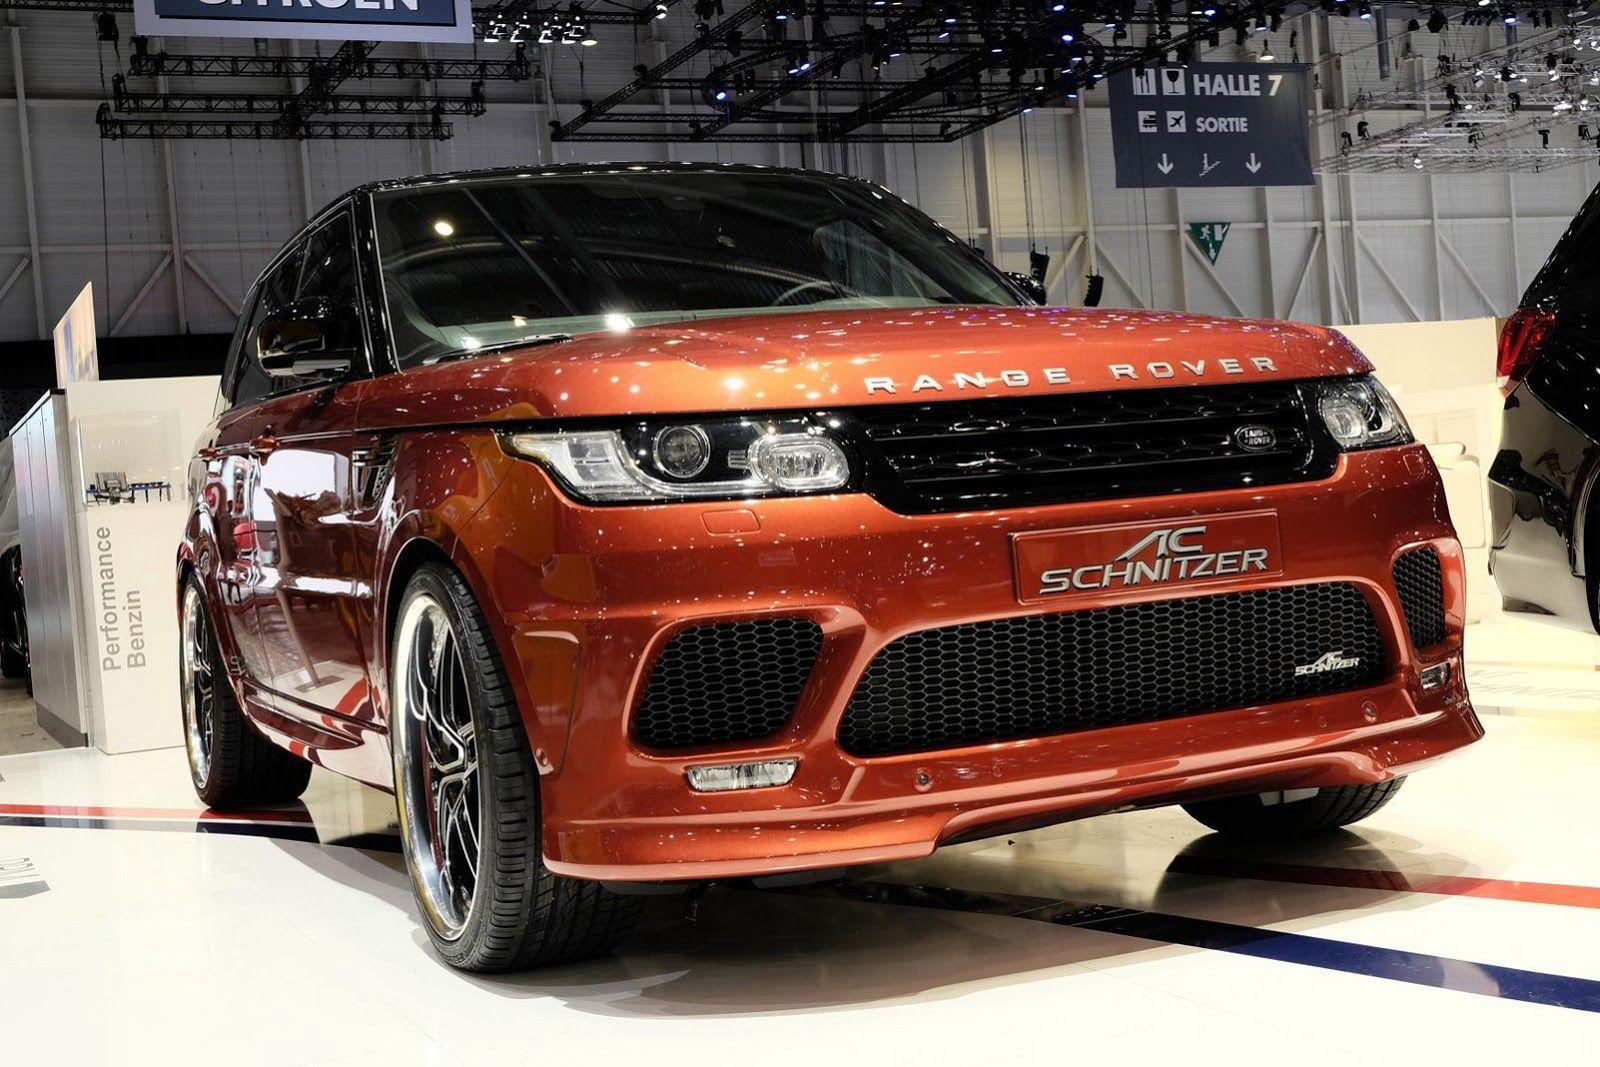 Range Rover Sport News, Reviews, Specs and other Trending